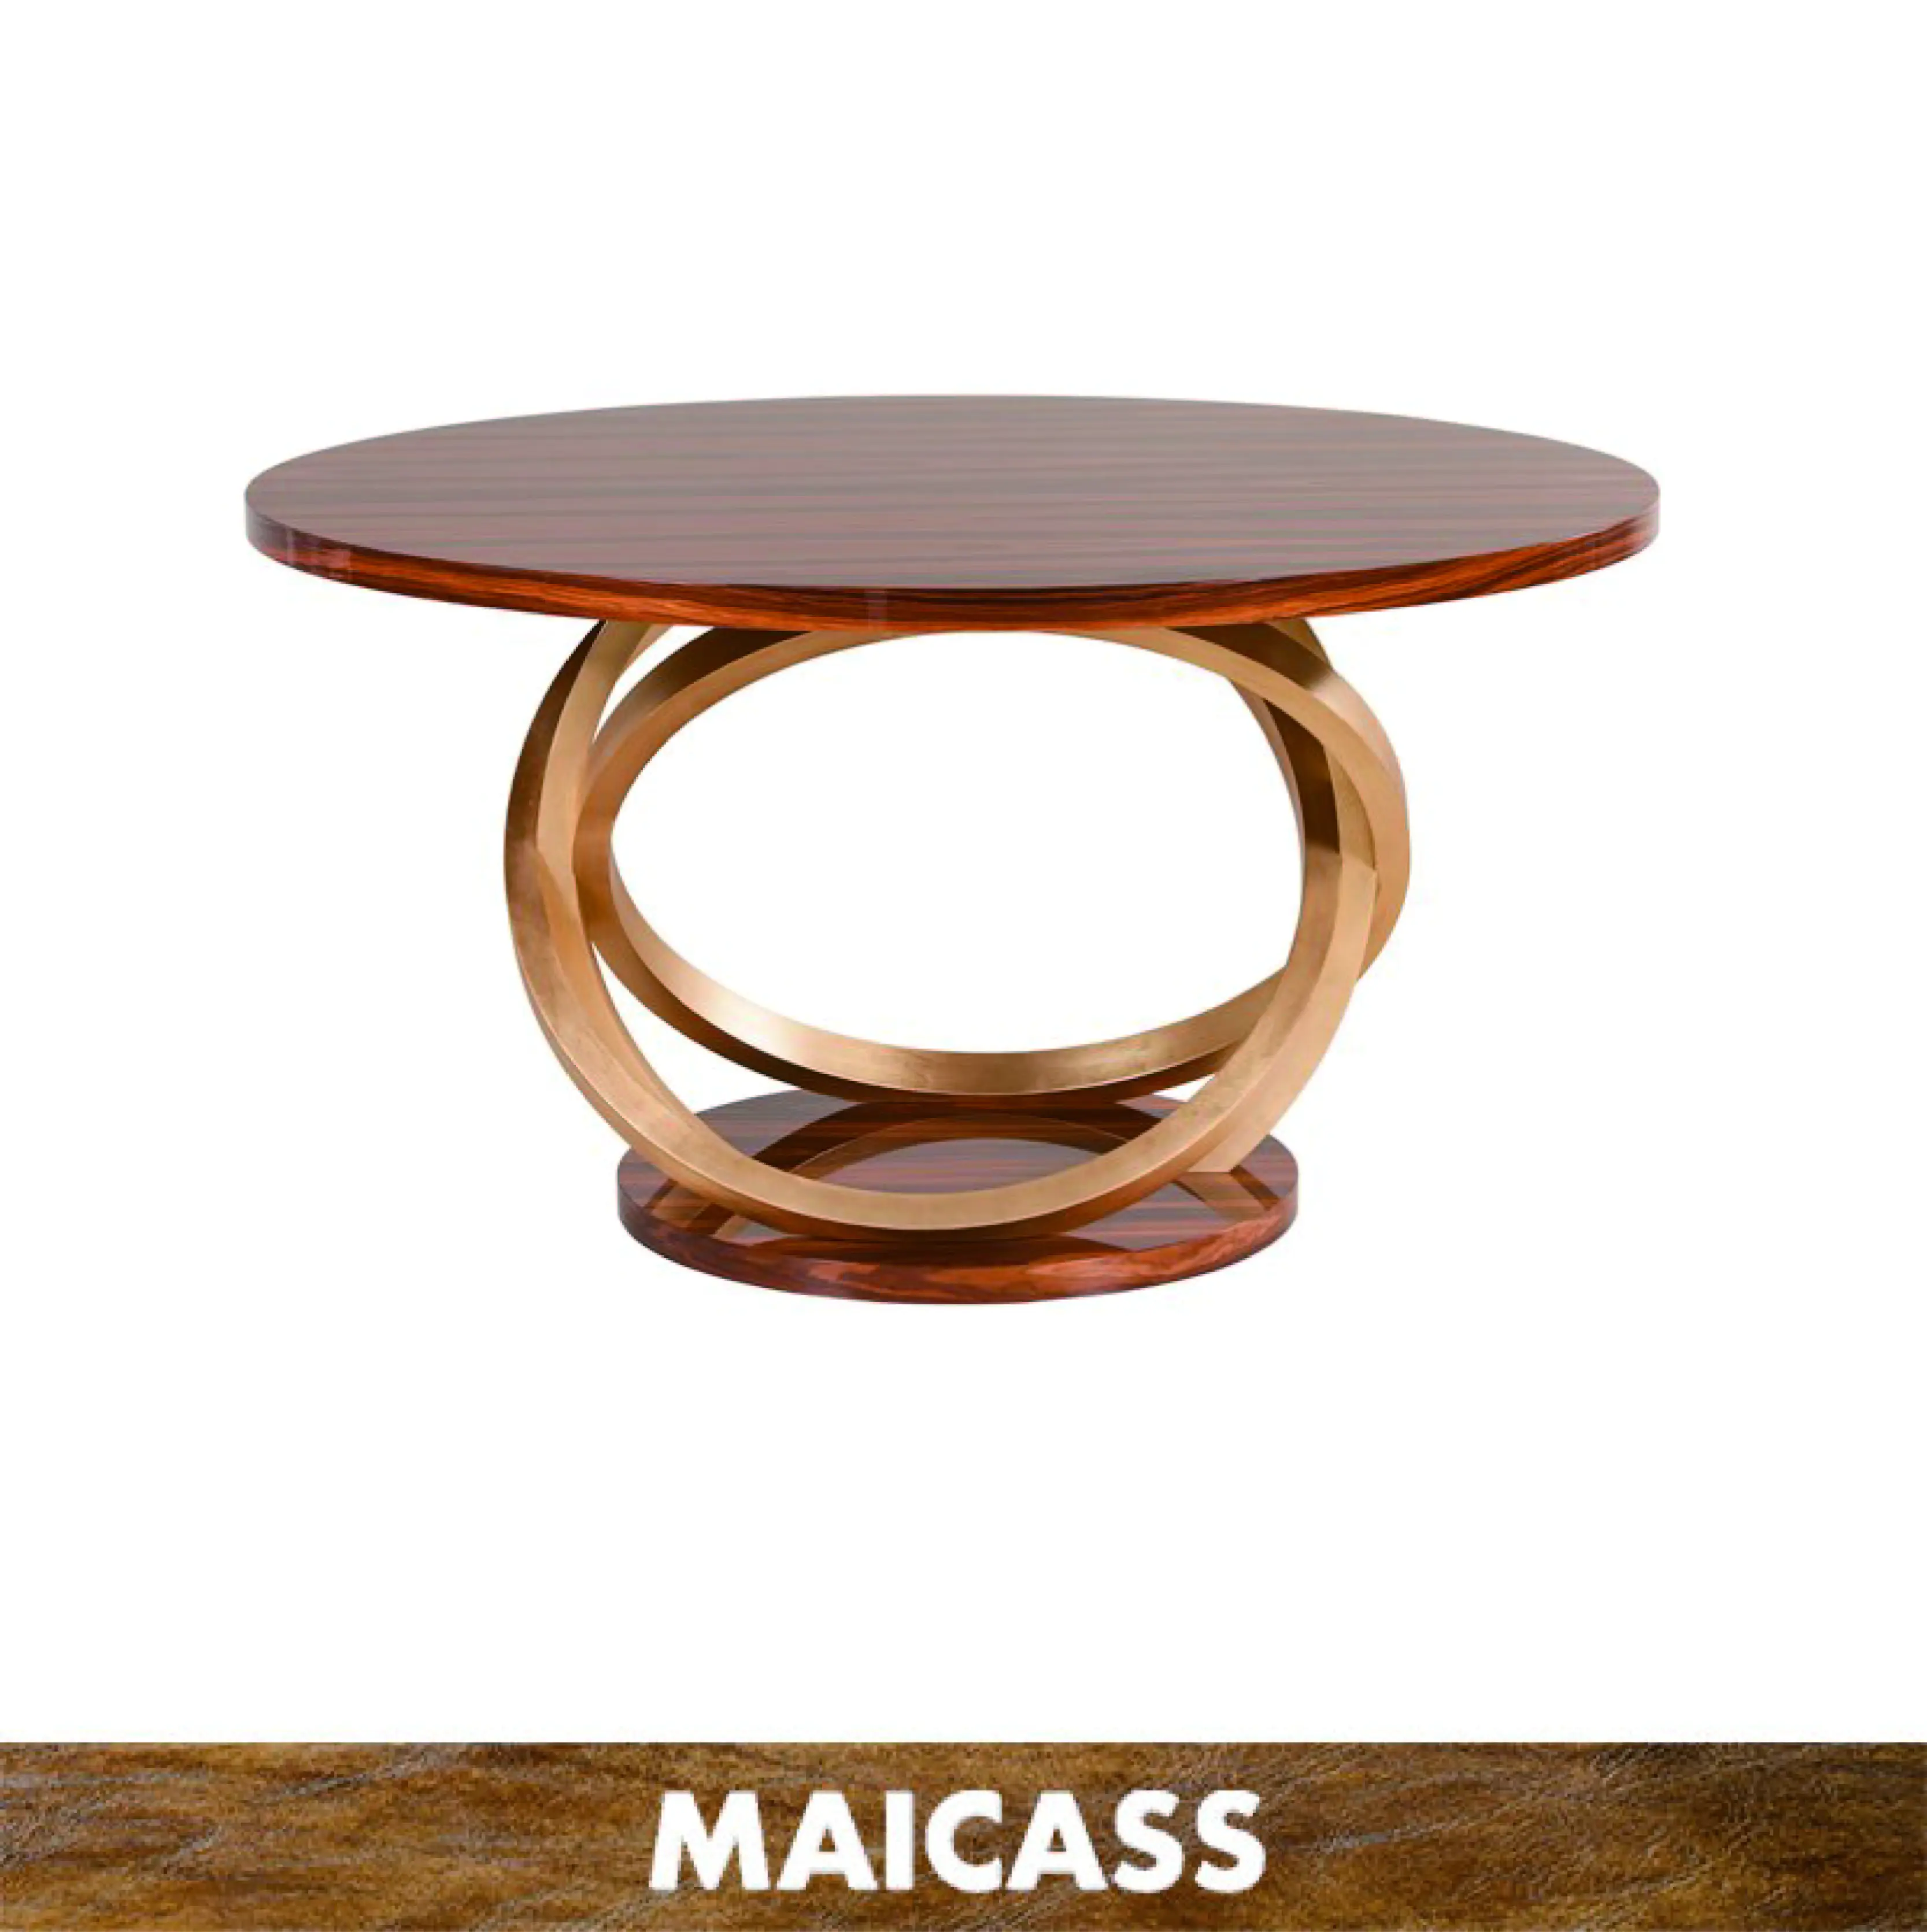 Modern High Gloss Ironwood Wooden Round Dining Table Buy